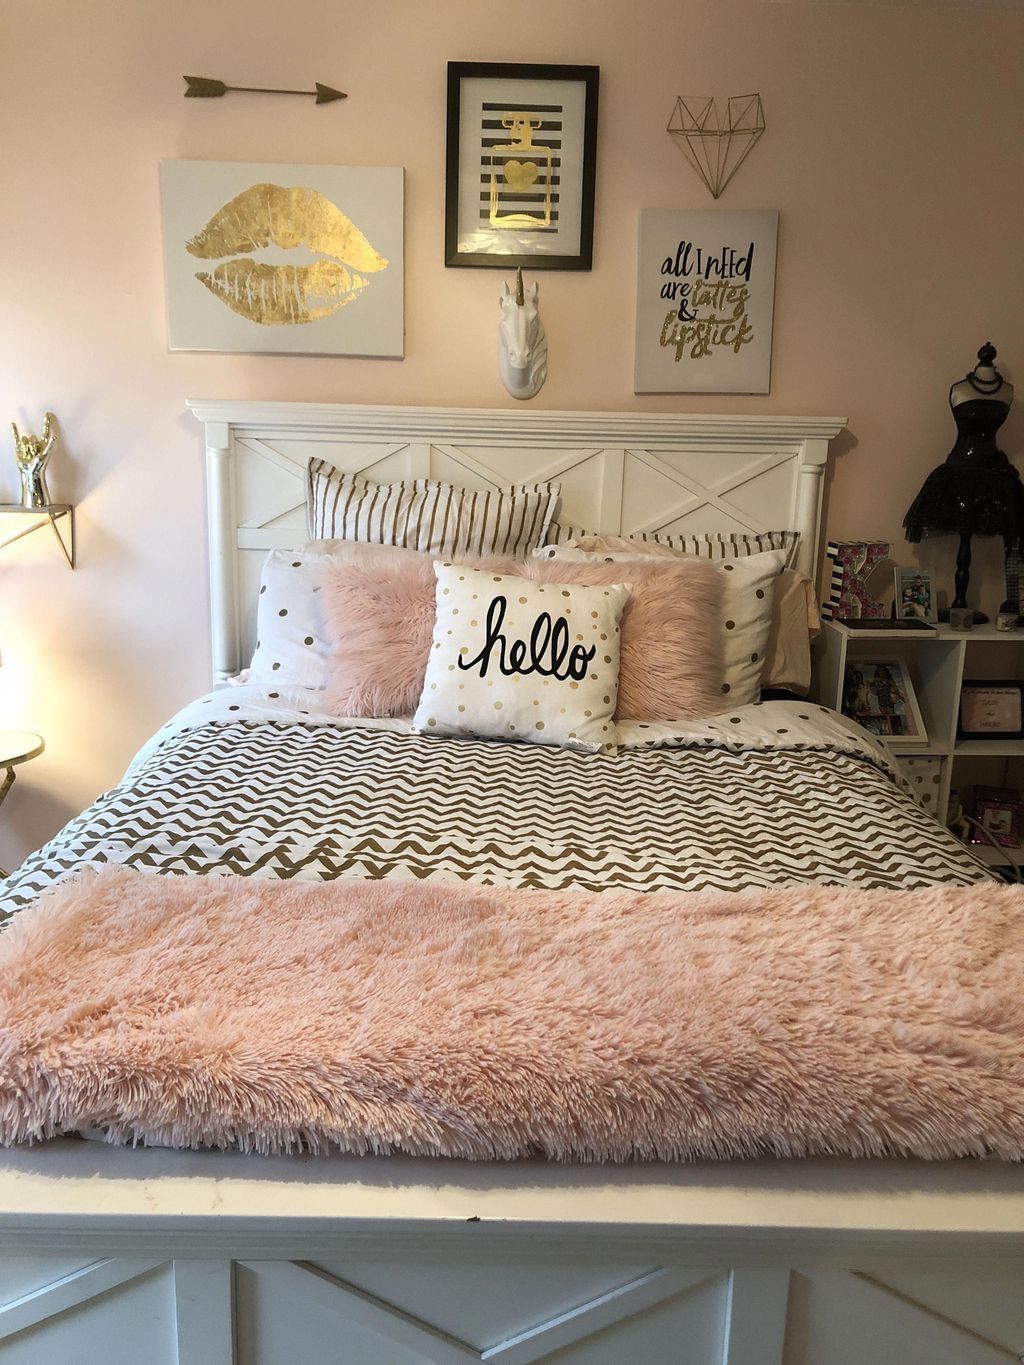 50 Pink Bedroom Decor You Can Try on Your Own -   14 room decor Bedroom colors ideas